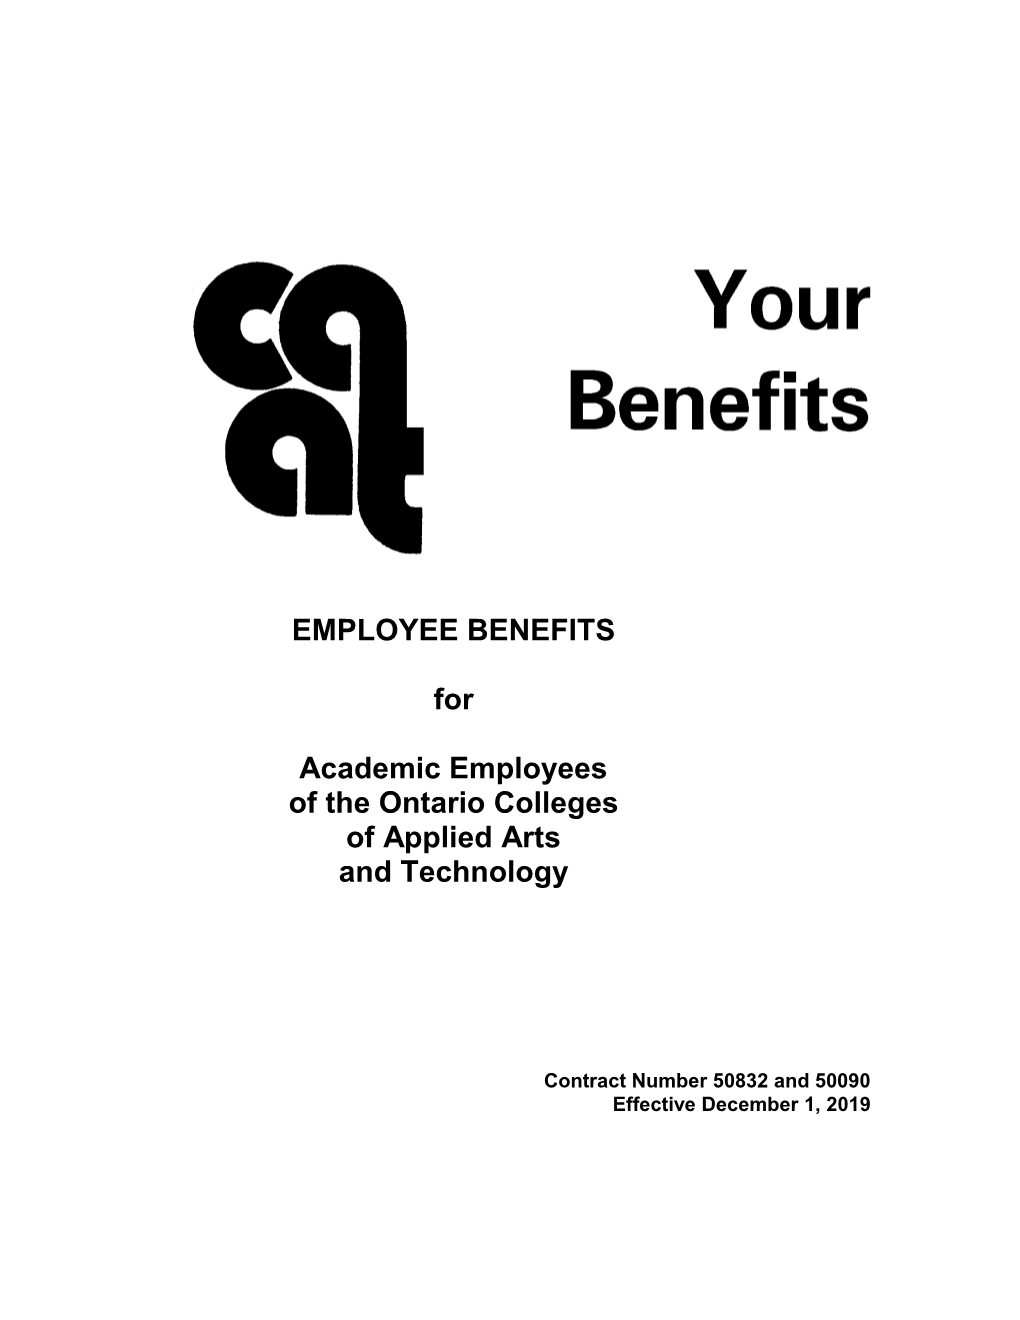 EMPLOYEE BENEFITS for Academic Employees of the Ontario Colleges